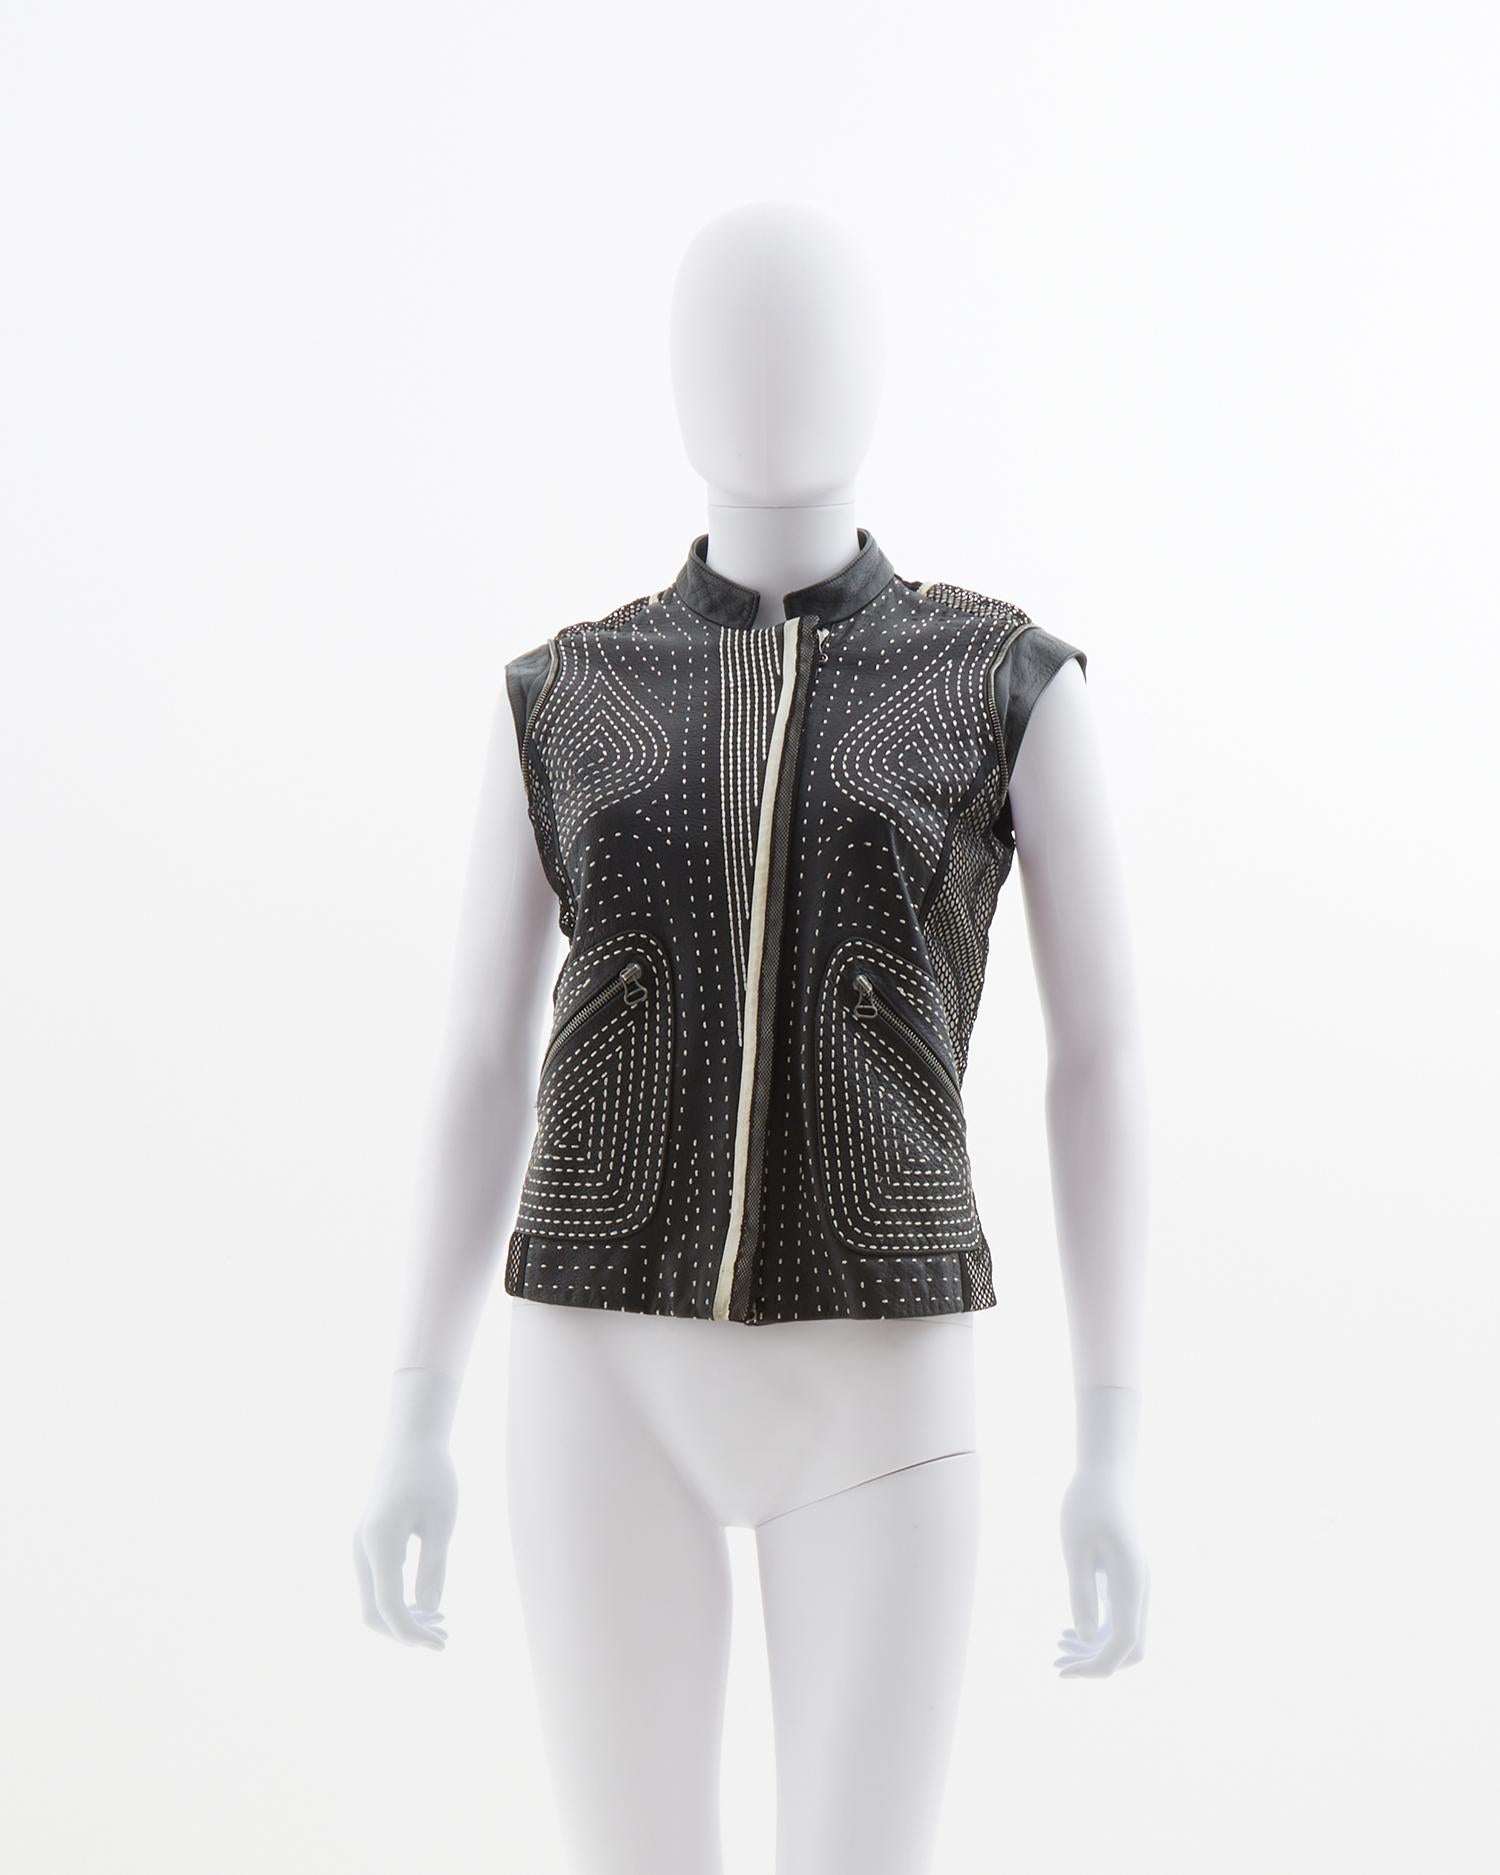 - Designed by Gianfranco Ferrè 
- Sold by Skof.Archive
- Black leather jacket 
- White stitching all over 
- Back netted 
- Detachable long-sleeves with zipper closure
- early 2000s

Size:
FR 38 - IT 42 - UK 10 - US 6 (EU)

Composition
100%